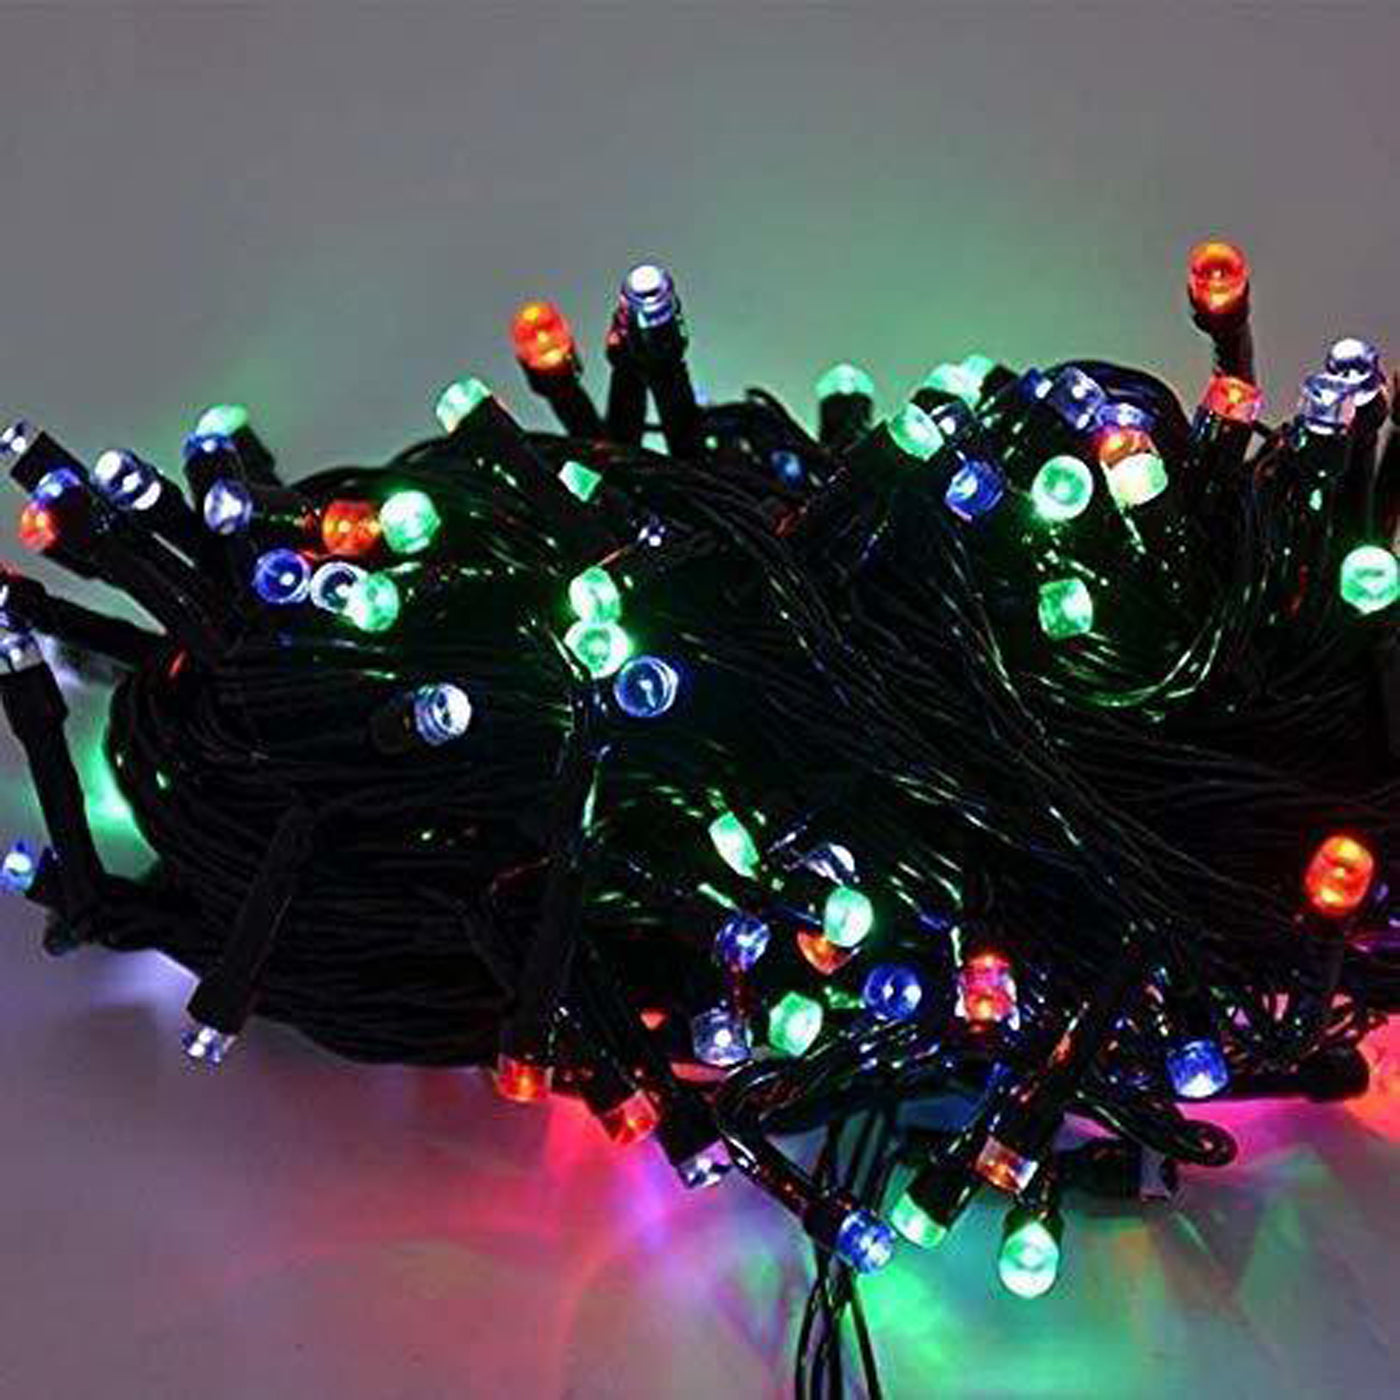 DecorTwist LED String Light for Home and Office Decor| Indoor & Outdoor Decorative Lights|Christmas |Diwali |Wedding | Christmas | Diwali | Wedding |12 Meter Length (12 MTR, 1)